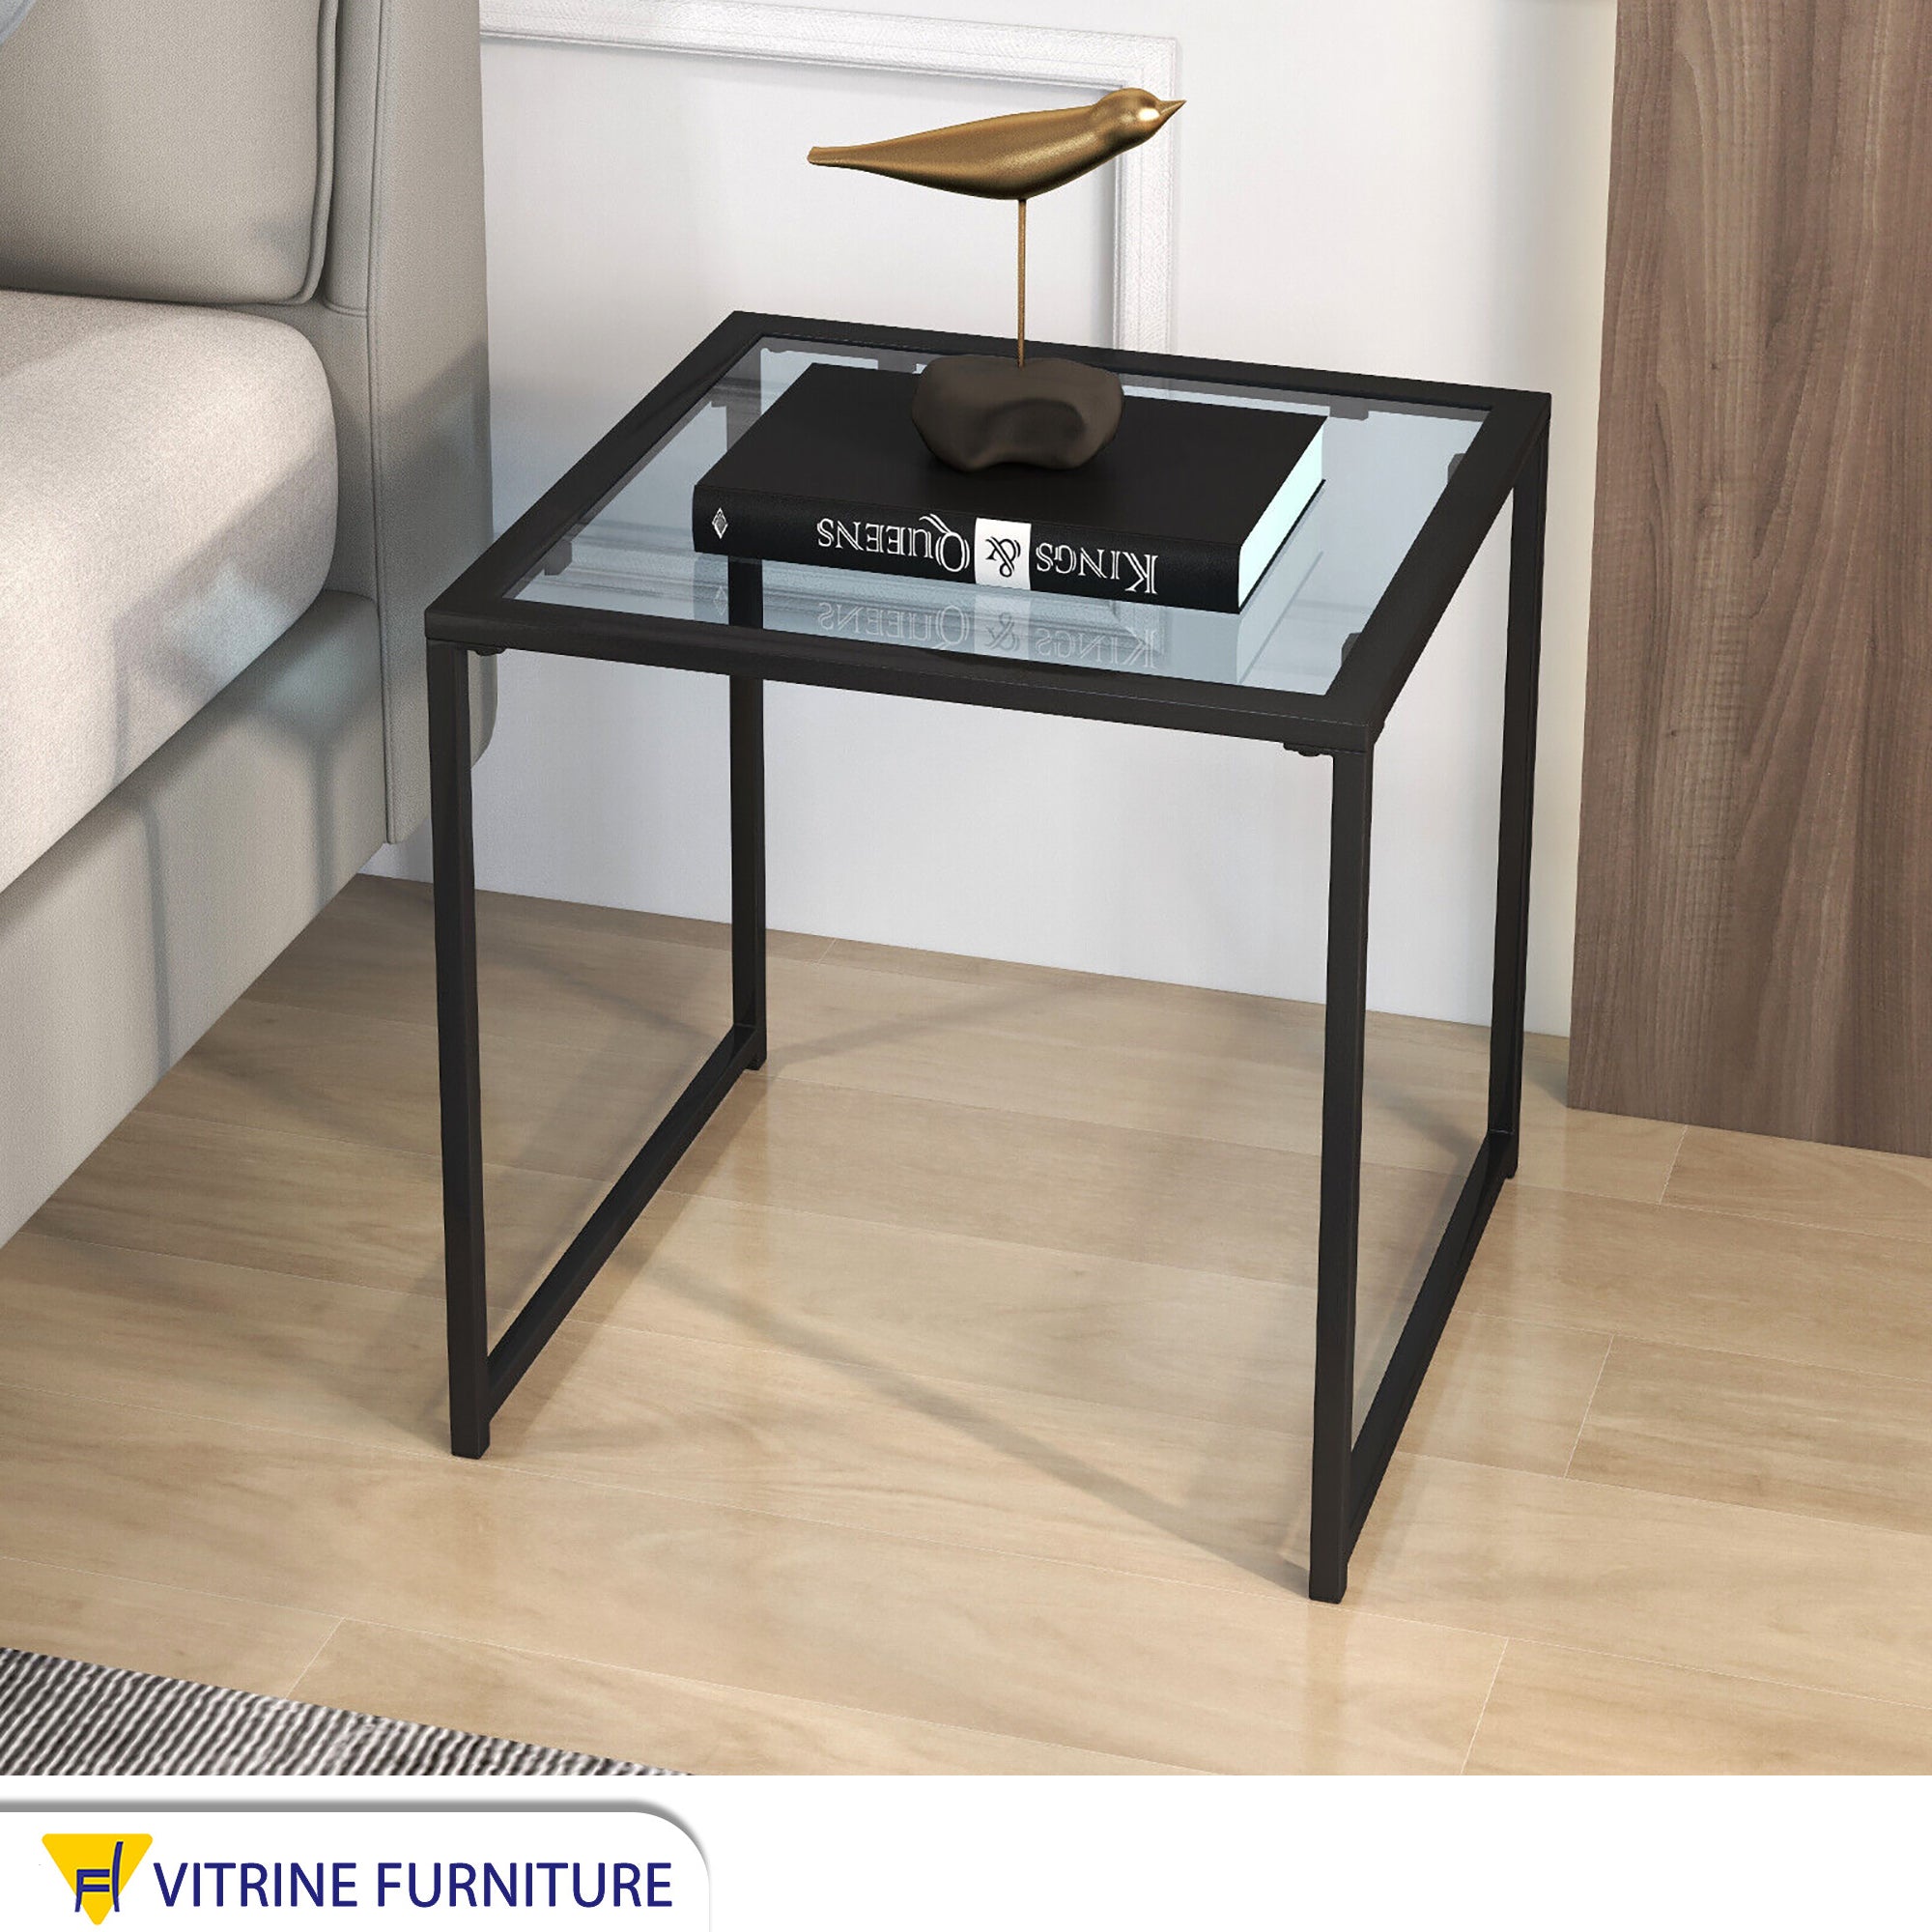 Black steel and glass side table